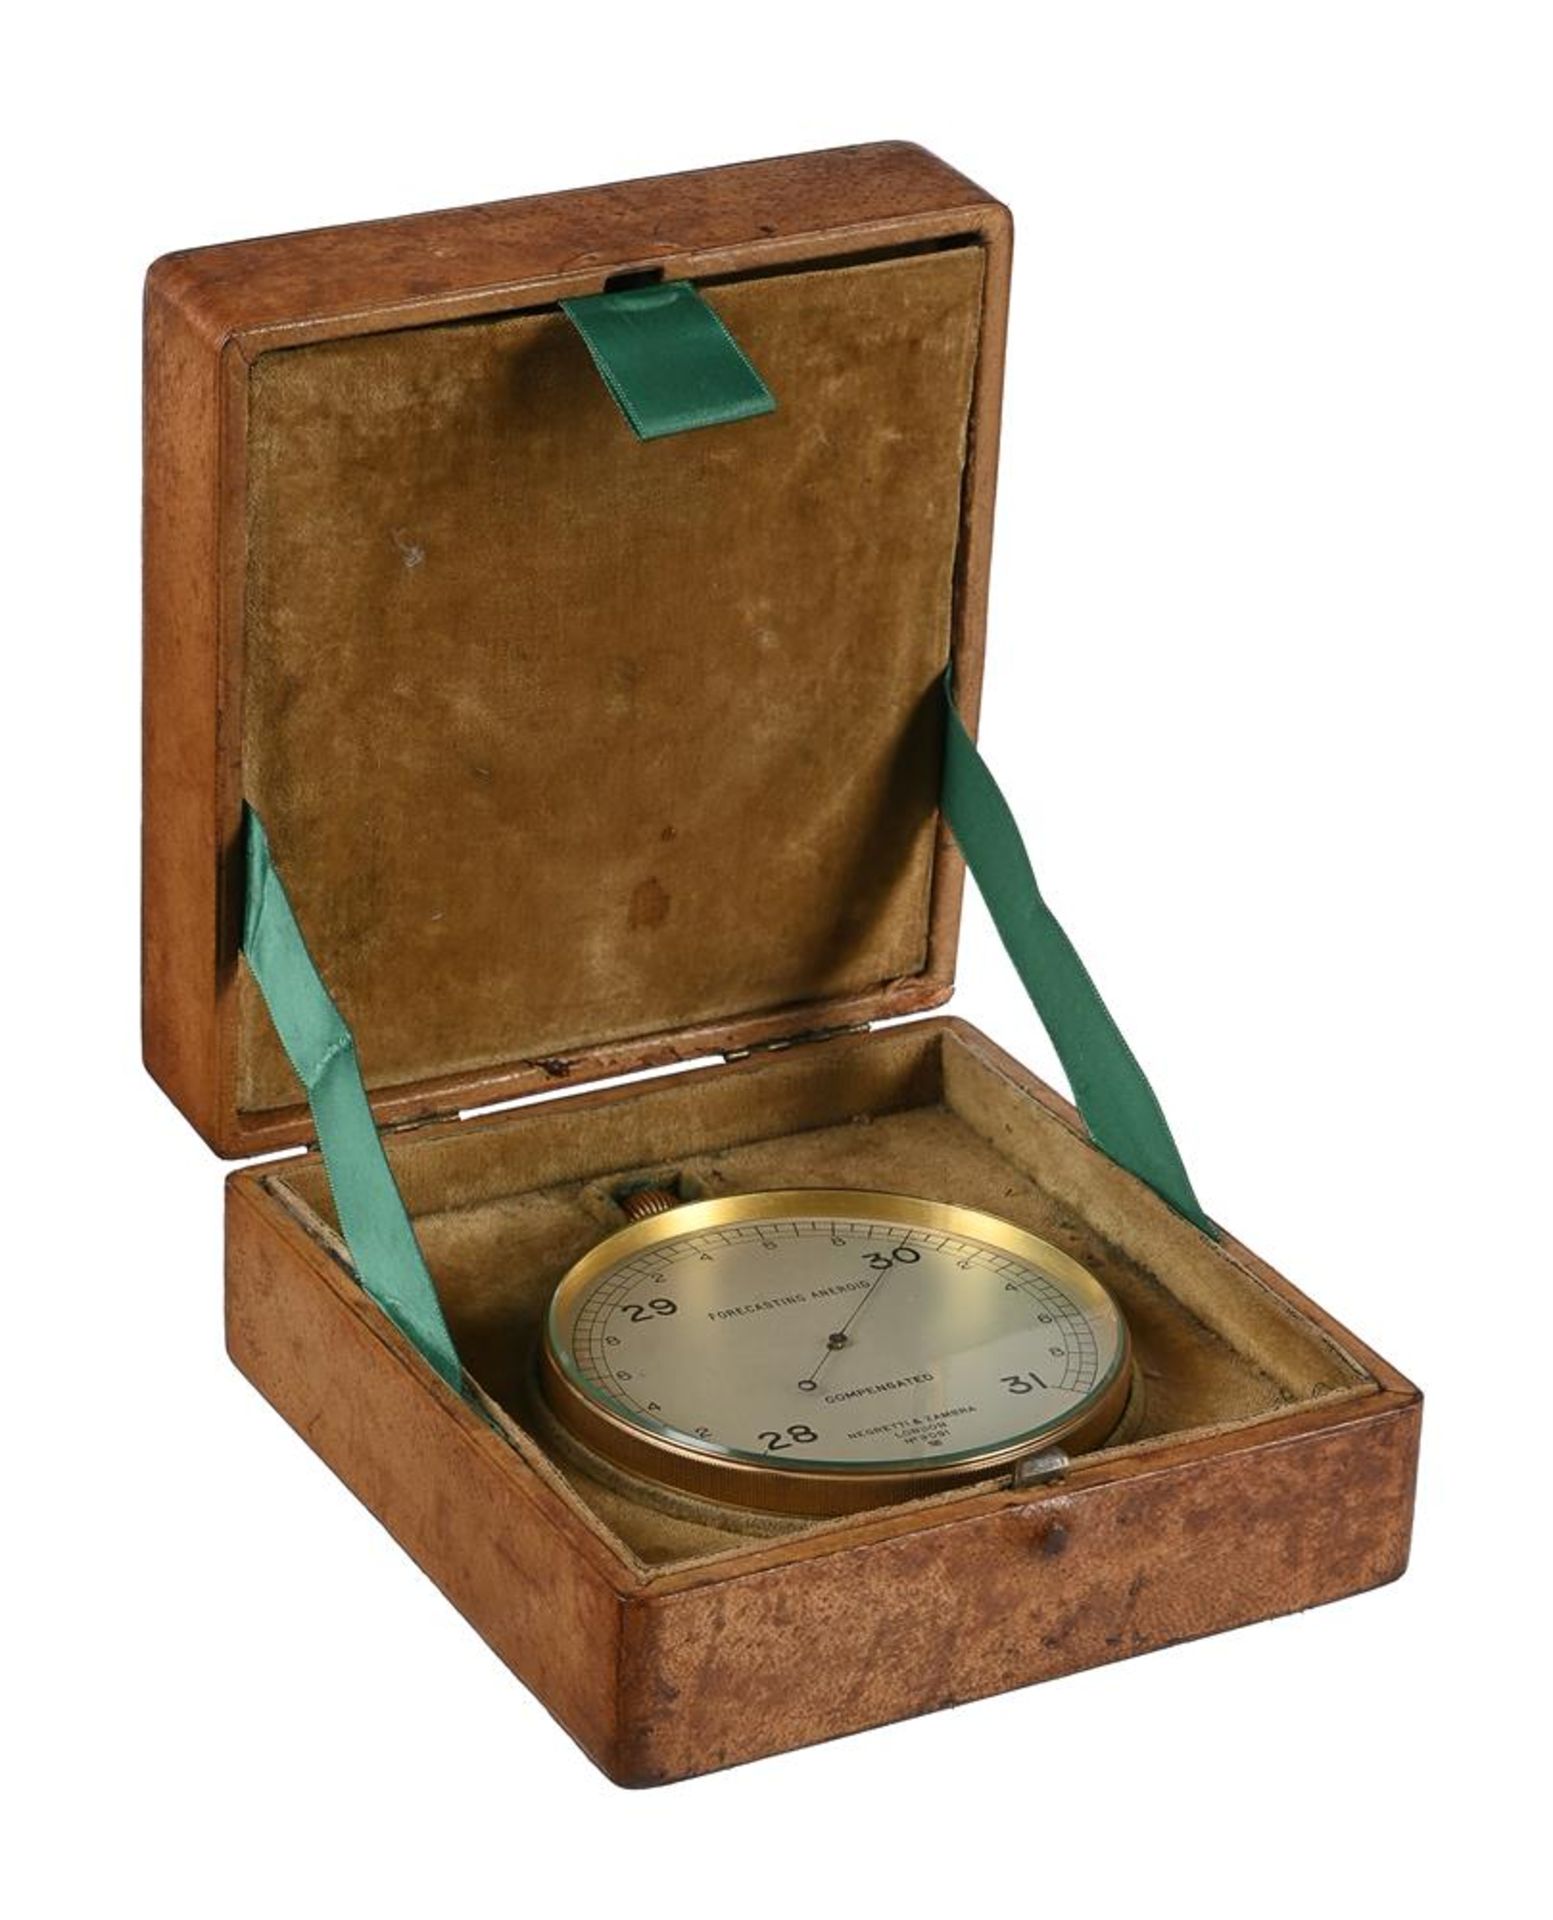 A CASED SET OF ANEROID FORECASTING BAROMETER AND LACQUERED BRASS WEATHER FORECASTING CALCULATOR - Image 4 of 7